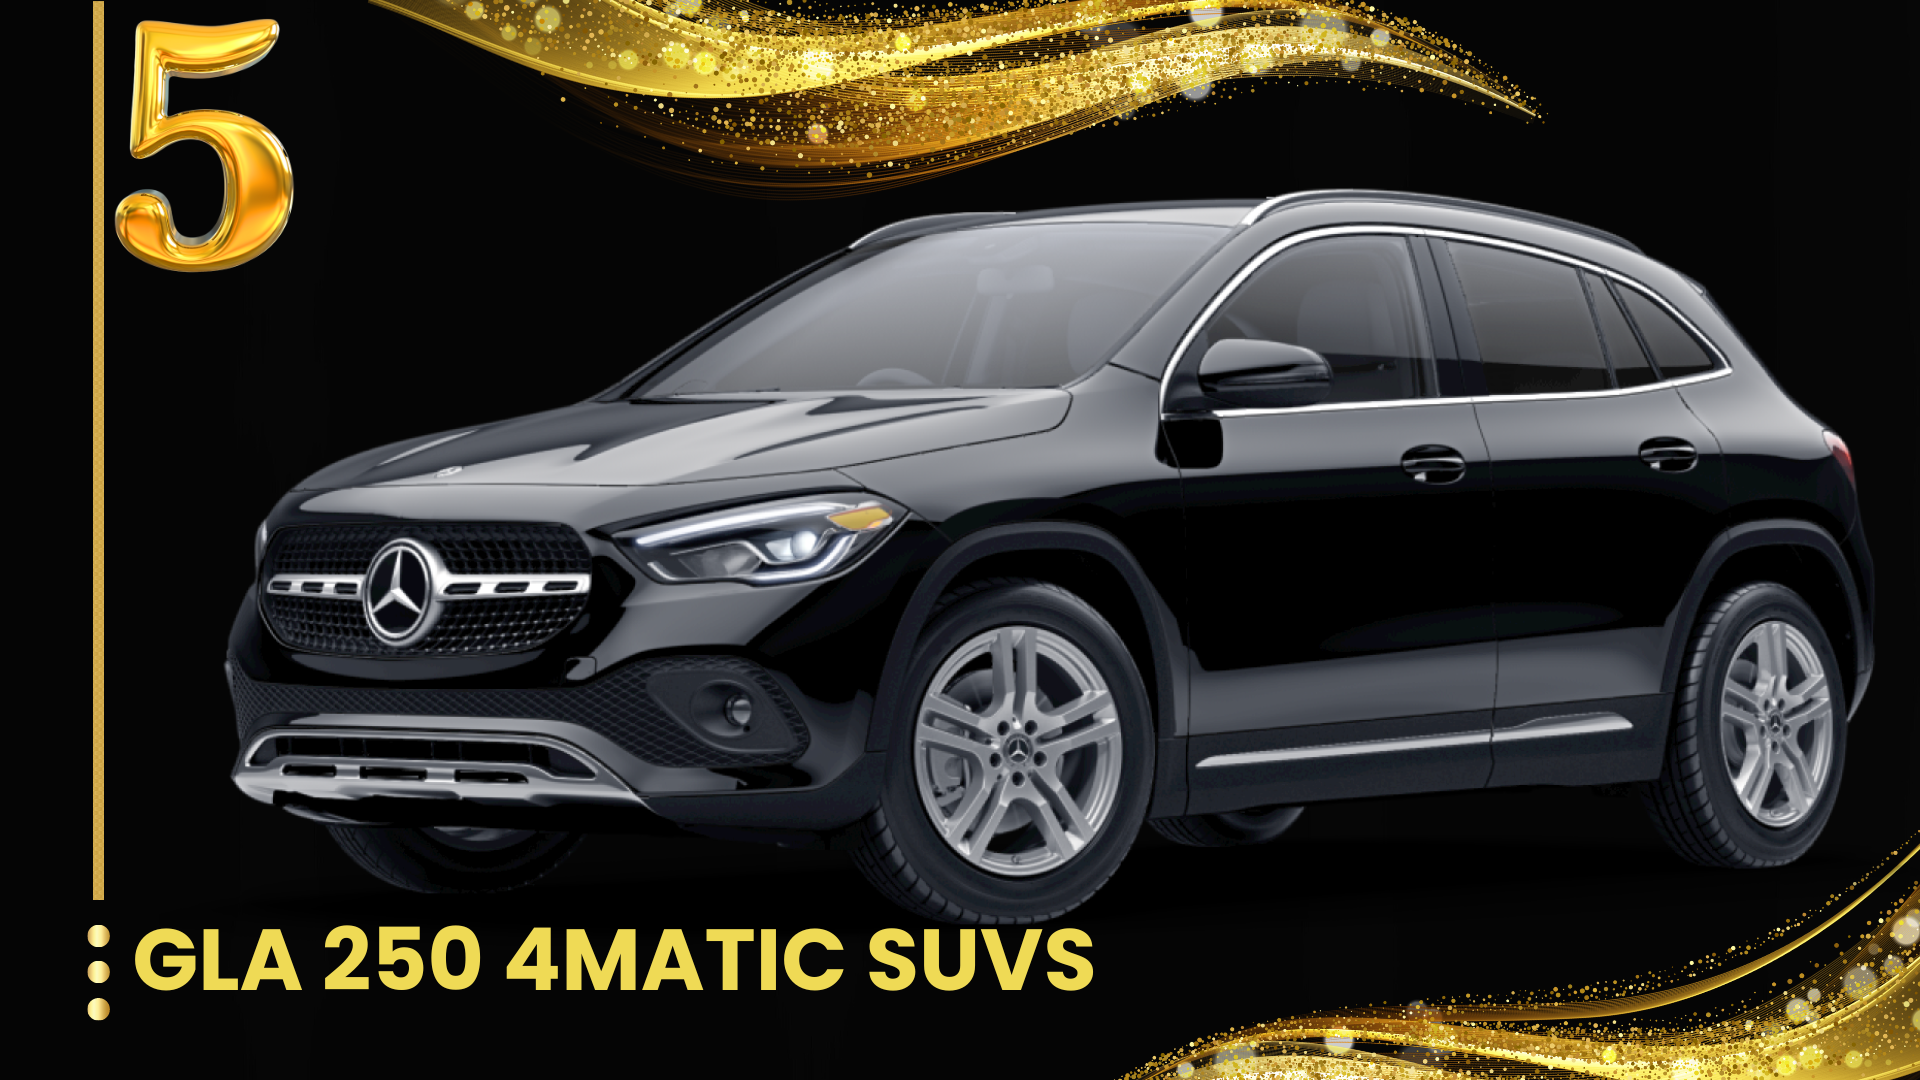 #5 GLA 250 4Matic SUV qualifies for section 179 tax credit